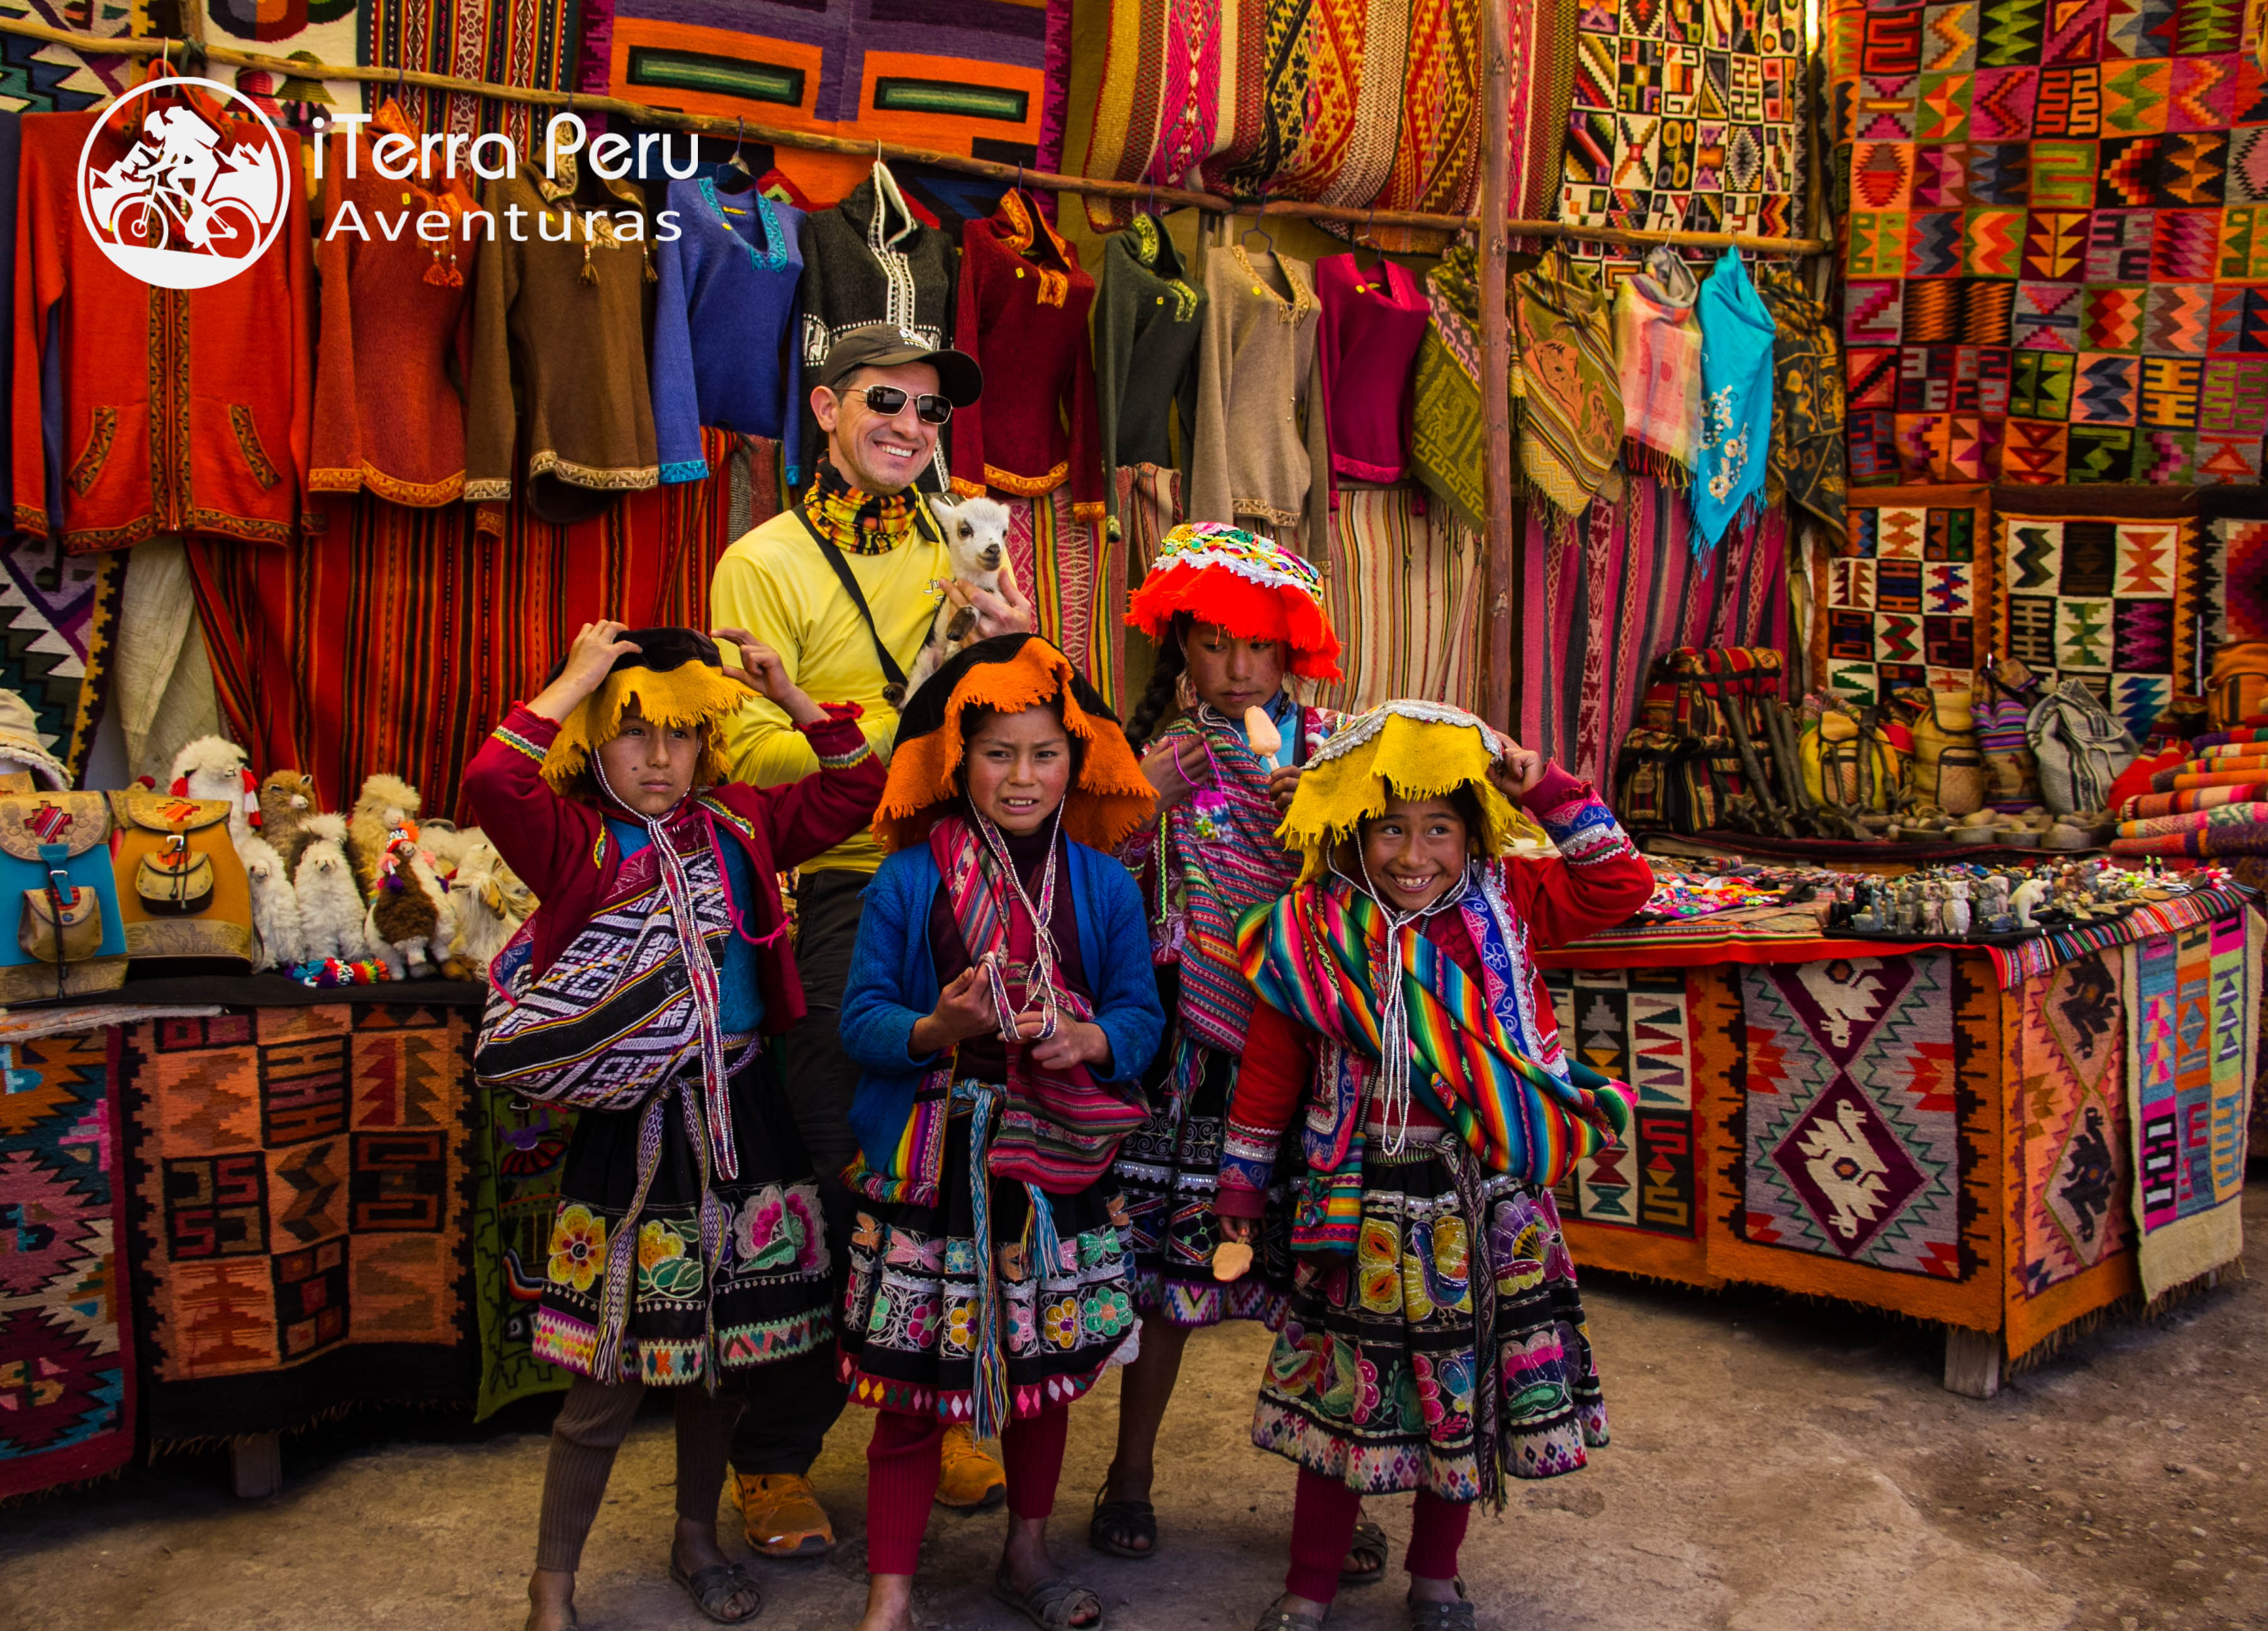 Cusco and Tacna were the favorite destinations of foreign tourists in 2018